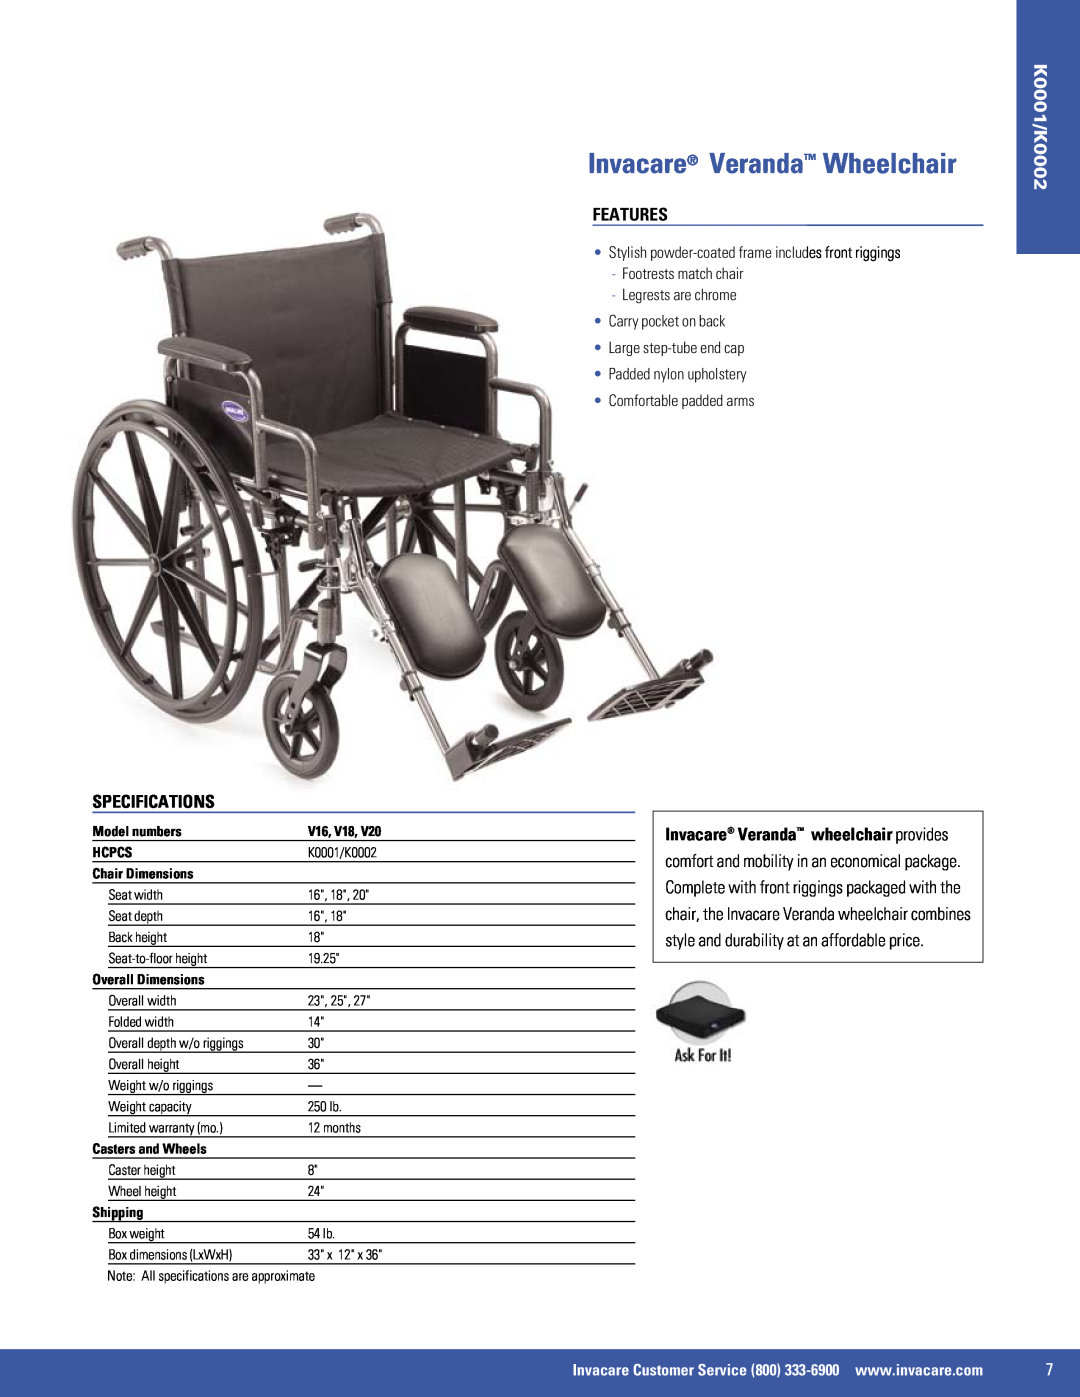 Invacare EX2, 9000 XT, 9000 SL Invacare Veranda Wheelchair, Specifications, Features, K0001/K0002, Comfortable padded arms 